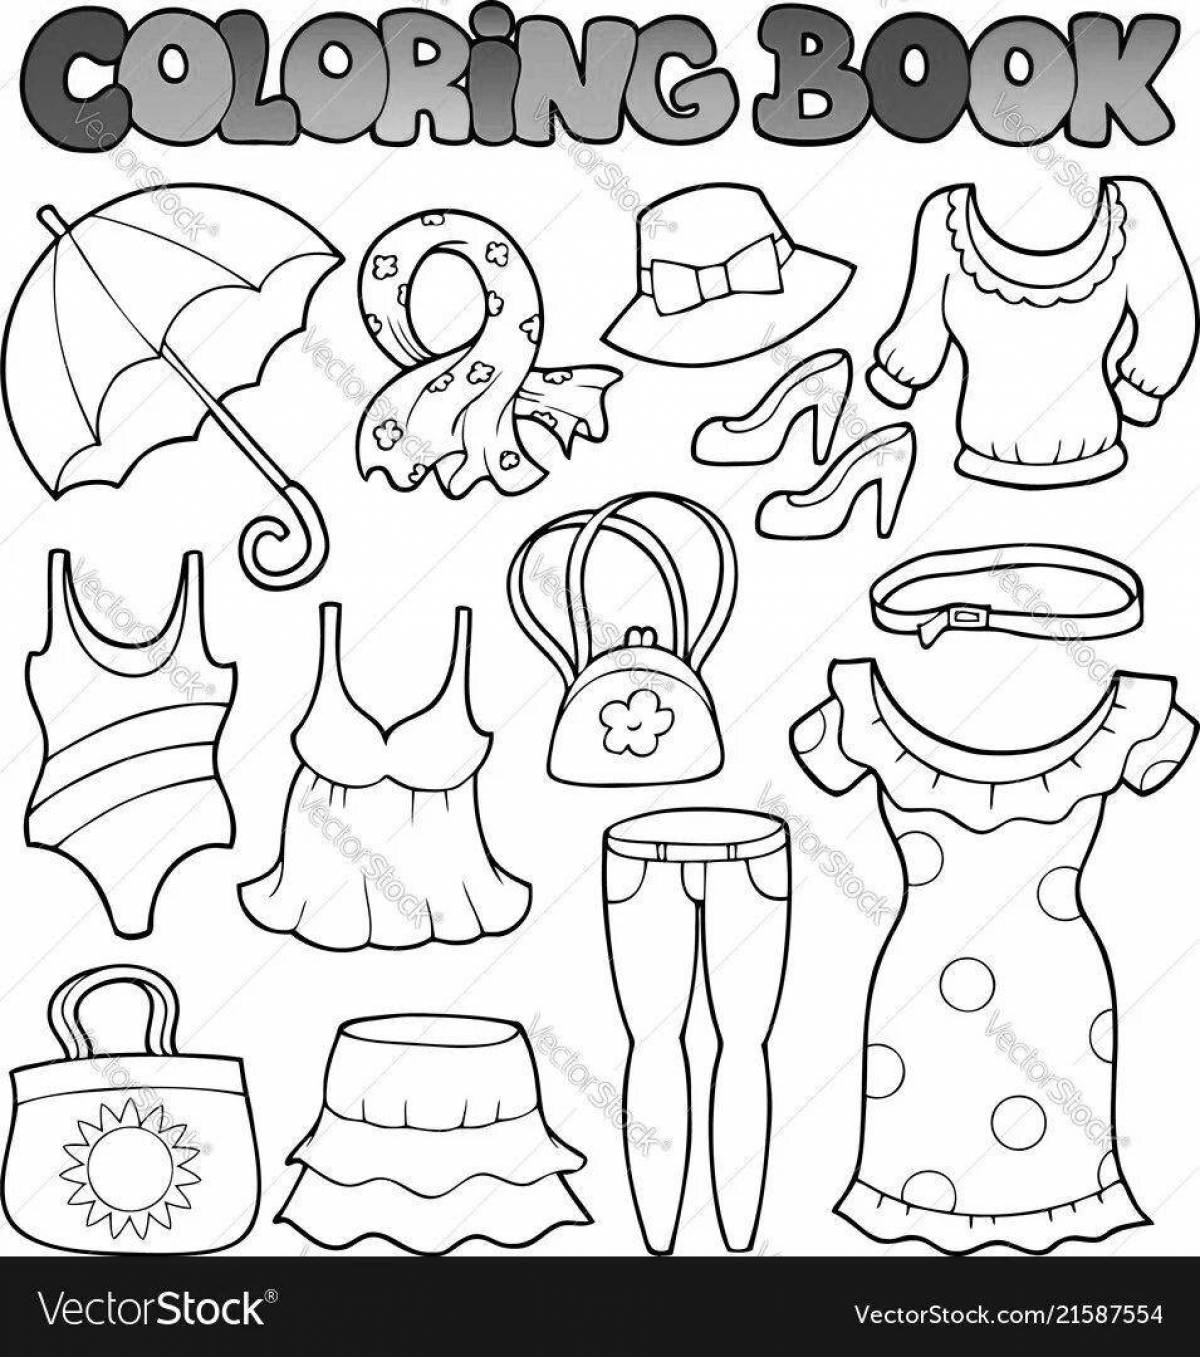 Funny summer clothes coloring pages for kids